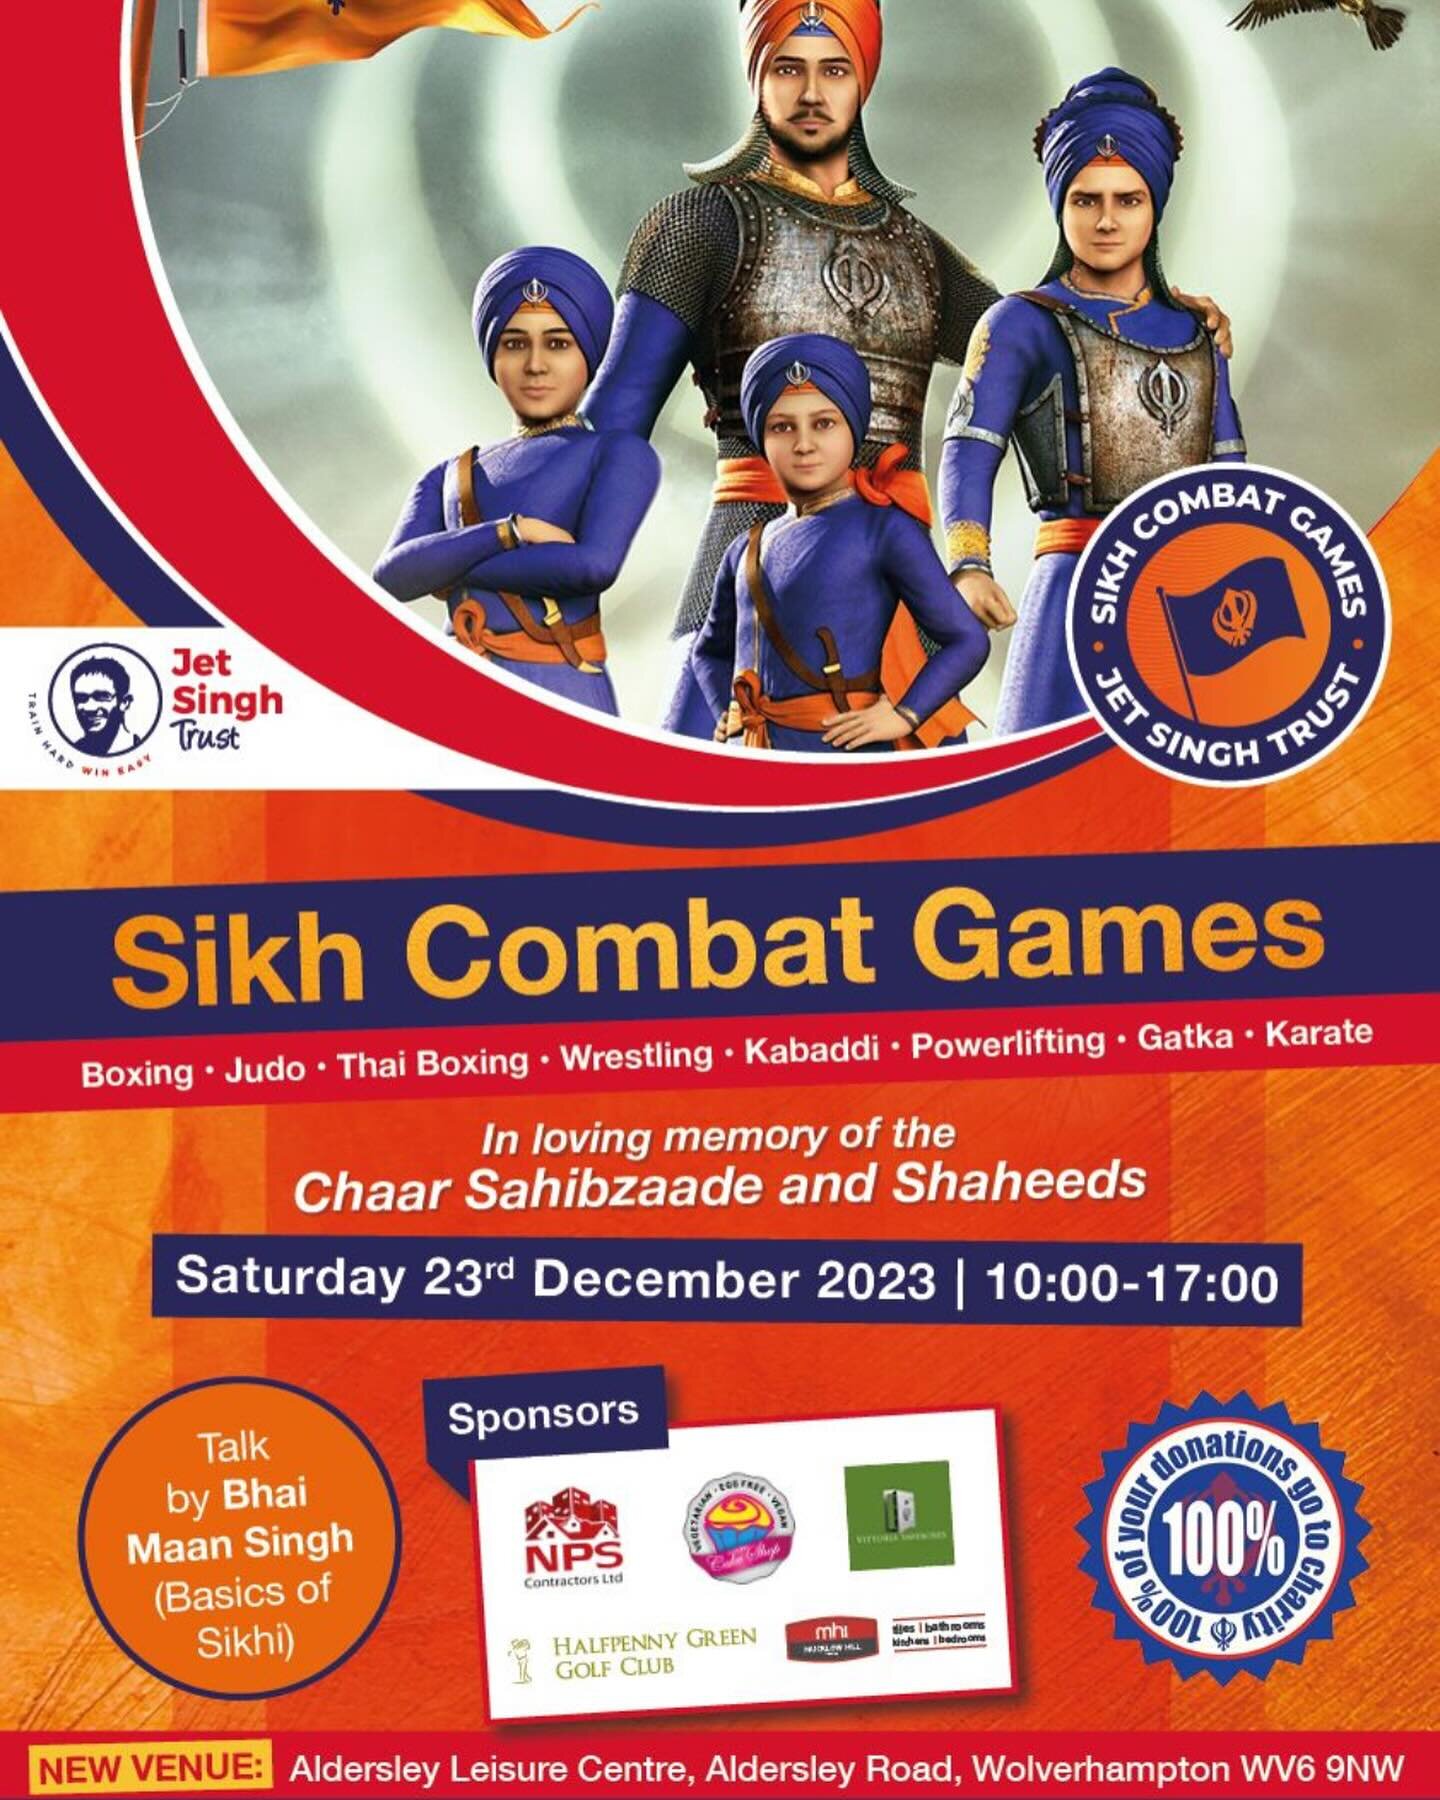 NEW VENUE ALERT. The Sikh combat games will now be held at  Aldersley Leisure Village Wolverhampton WV6 9NW, please update the location amongst your contacts.  To register to participate please visit our website www.jetsinghtrust.org go to Events pag